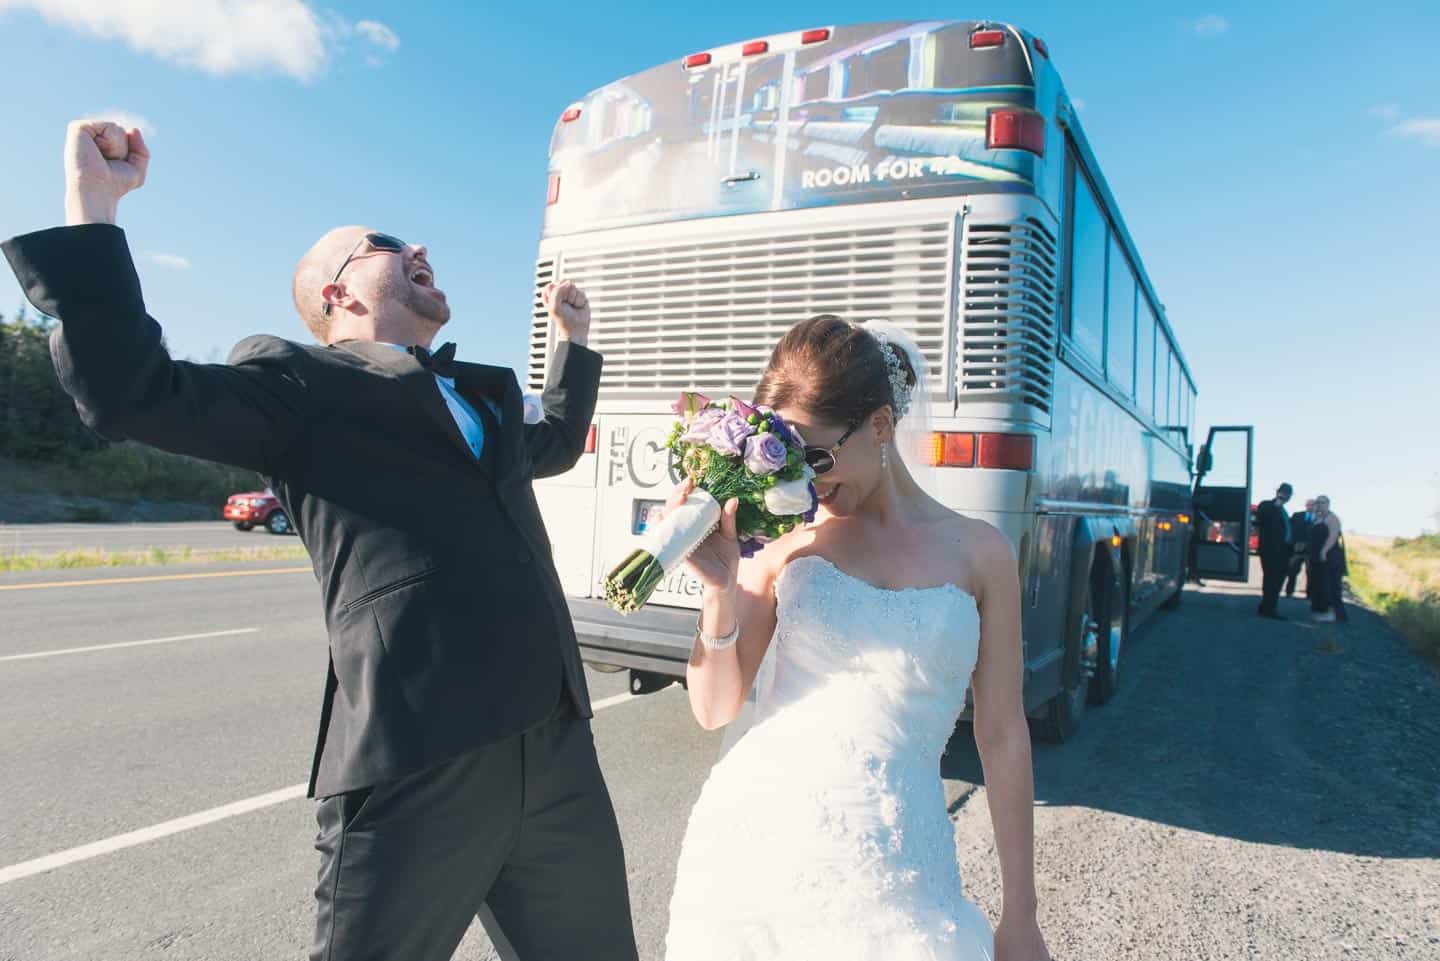 A couple waits on the side of a highway nearby a broken down bus. Planning is important on your wedding day.